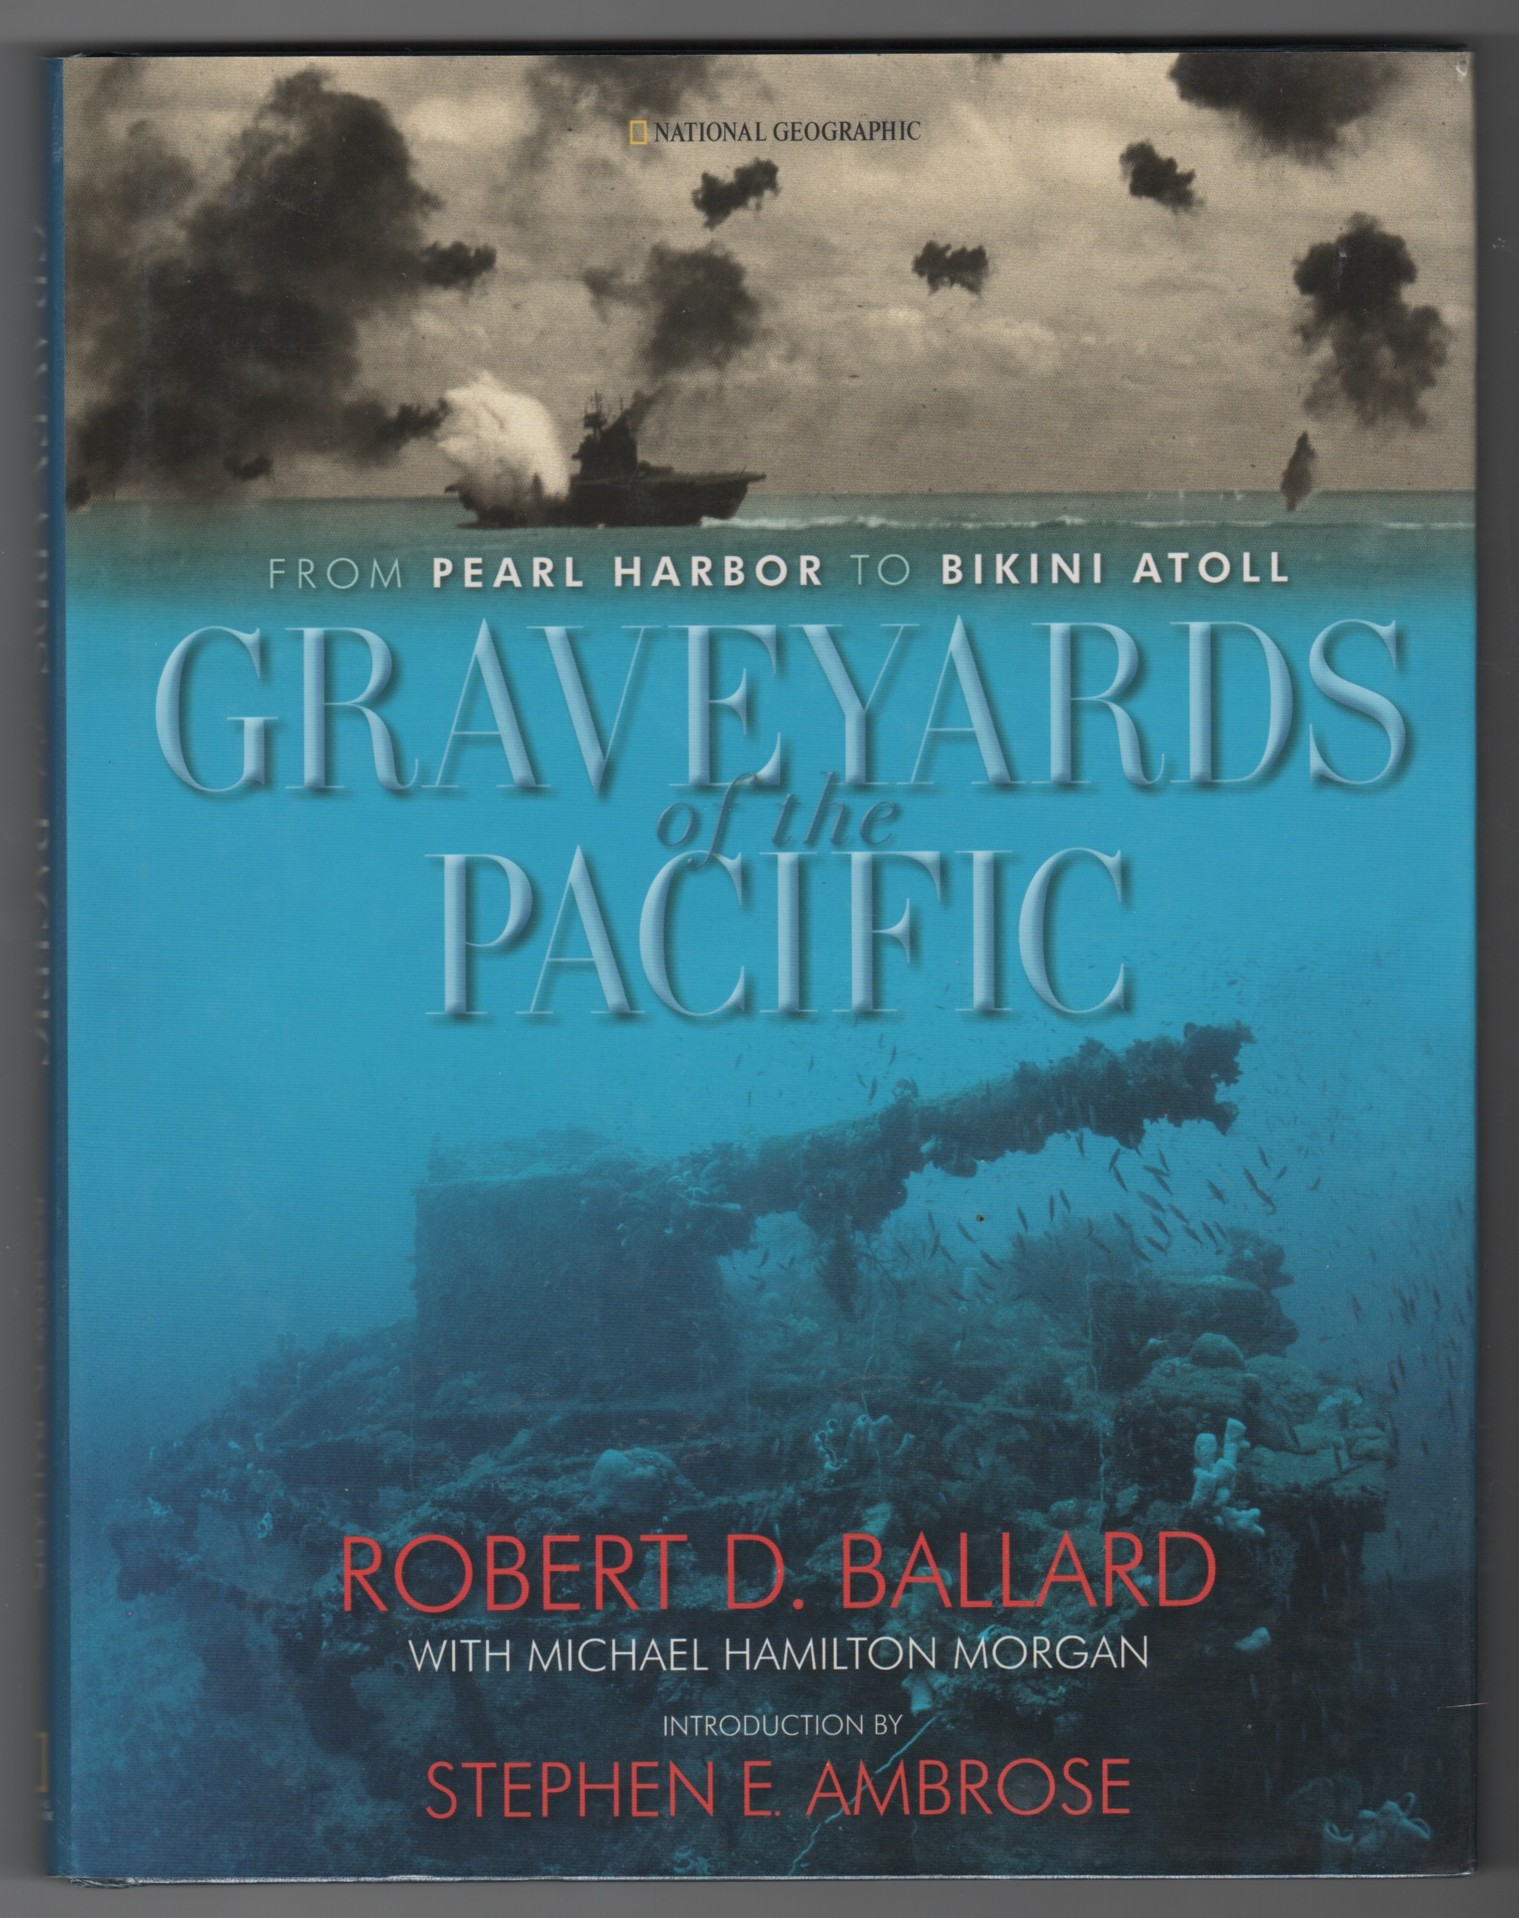 BALLARD, ROBERT D. - Graveyards of the Pacific from Pearl Harbour to Bikini Atoll